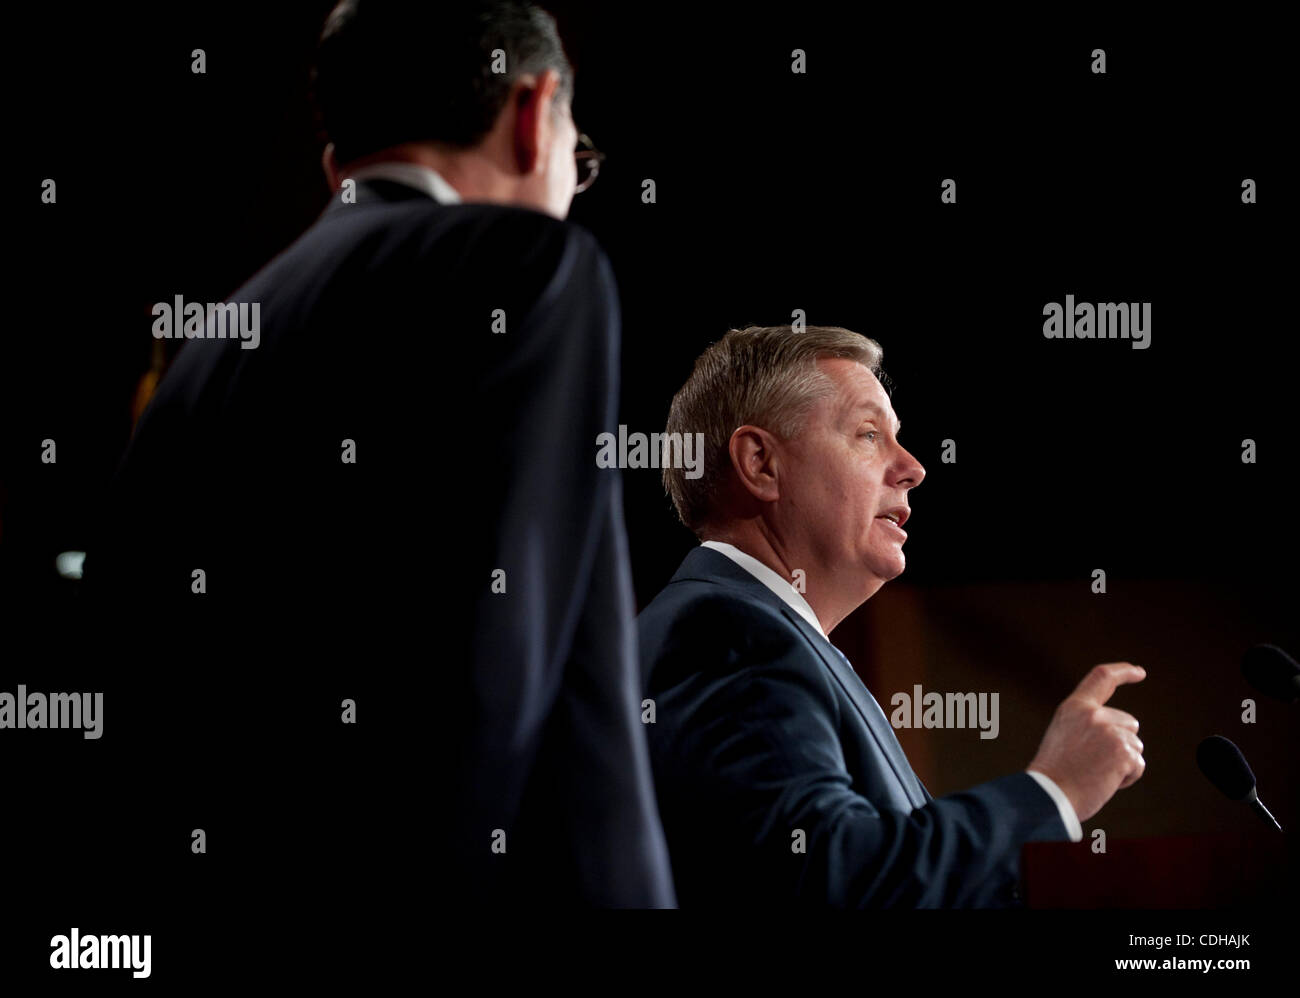 Feb 1, 2011 - Washington, District of Columbia, U.S. - Senator LINDSEY GRAHAM (R-SC)during a news conference on legislation to repeal and replace the health care law by allowing states to ''Opt-Out'' of its major provisions. (Credit Image: © Pete Marovich/ZUMAPRESS.com) Stock Photo